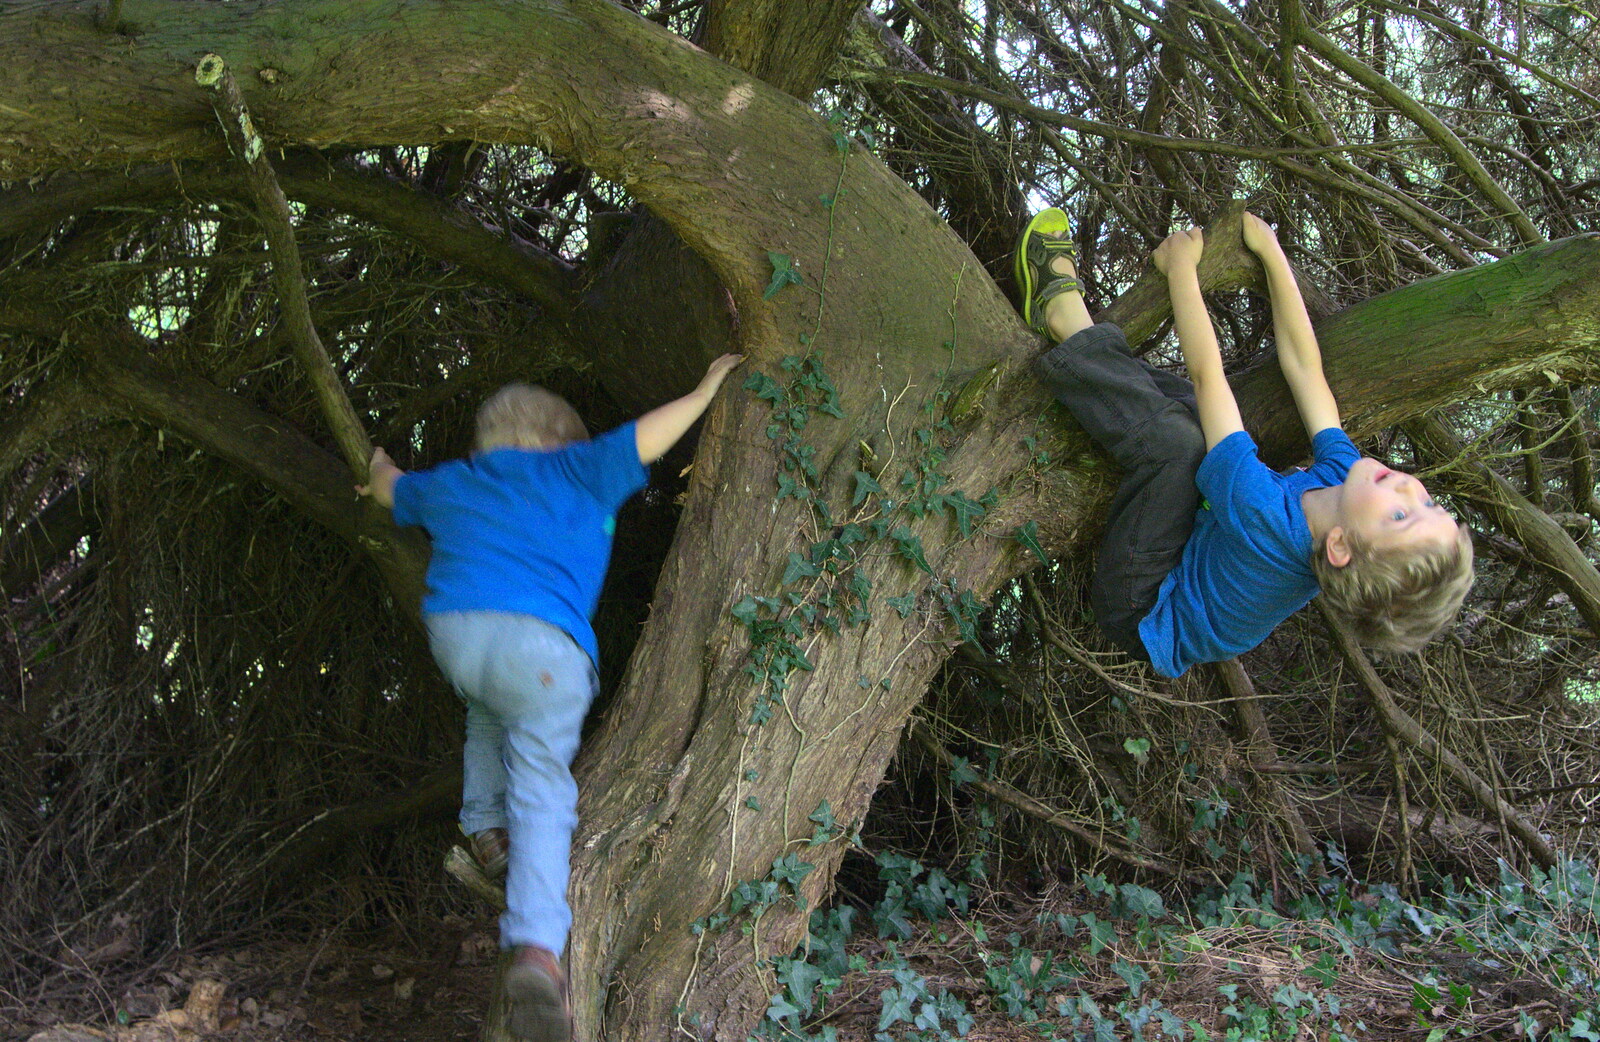 The boys mess around in a tree from A Trip to Bressingham Steam Museum, Bressingham, Norfolk - 28th September 2014